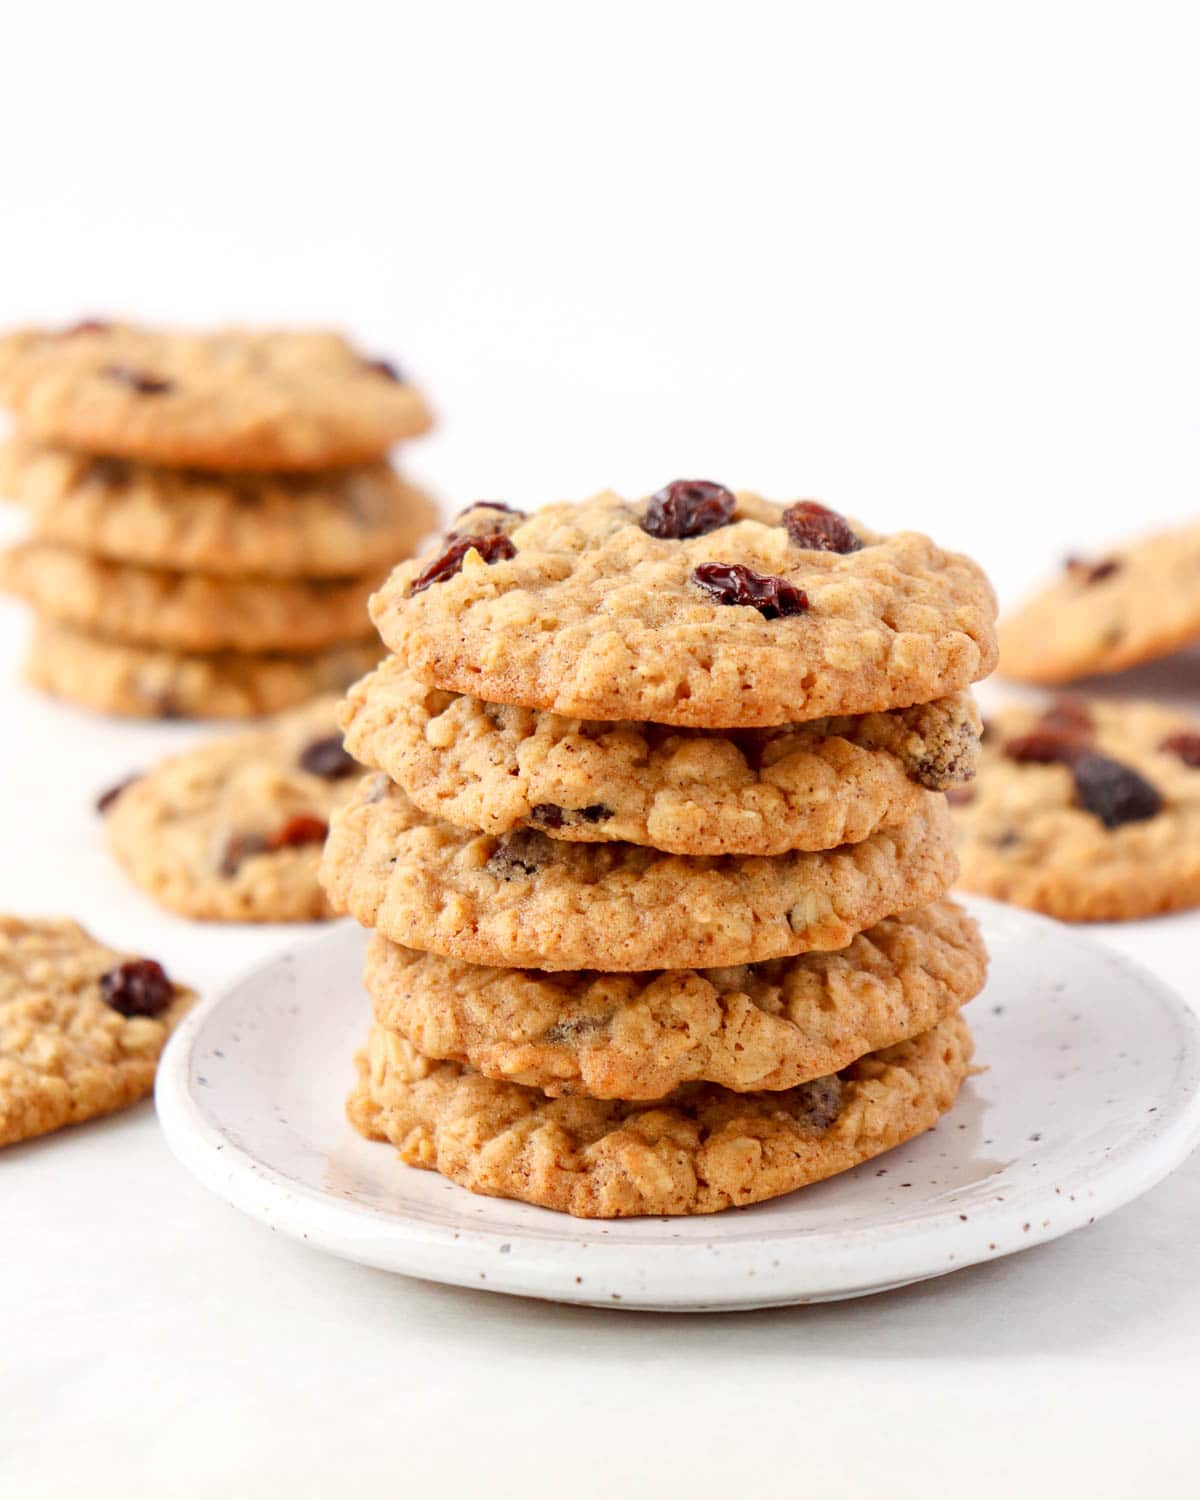 Stack of oatmeal raisin cookies on a white plate.